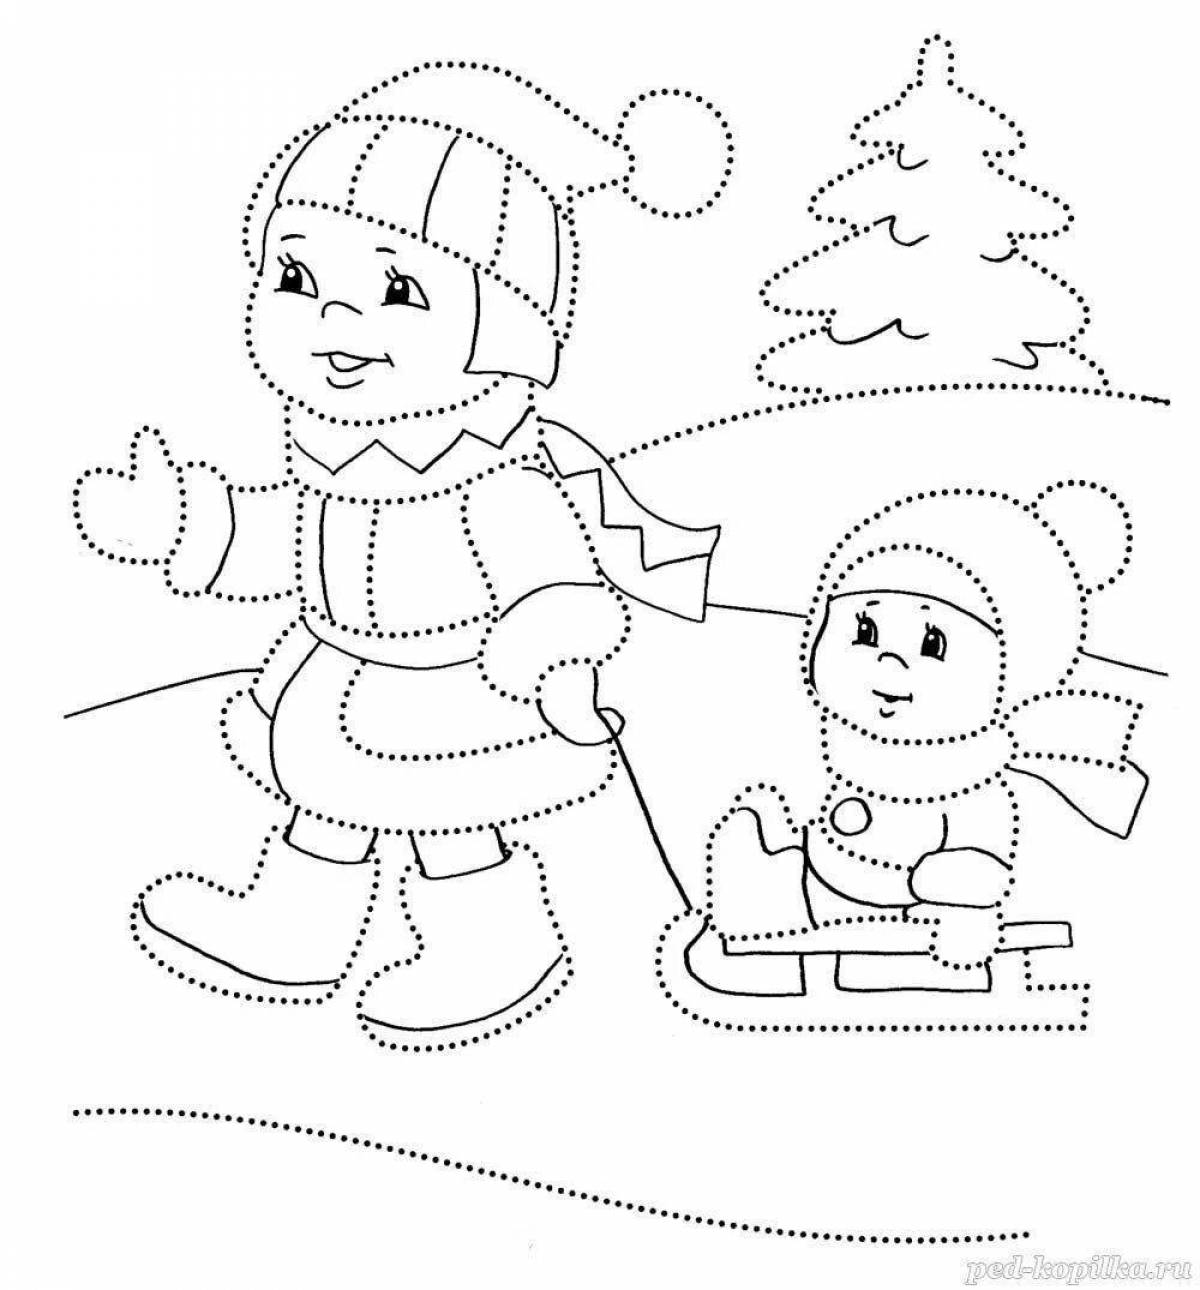 Wonderful coloring winter fun for kids 6 years old